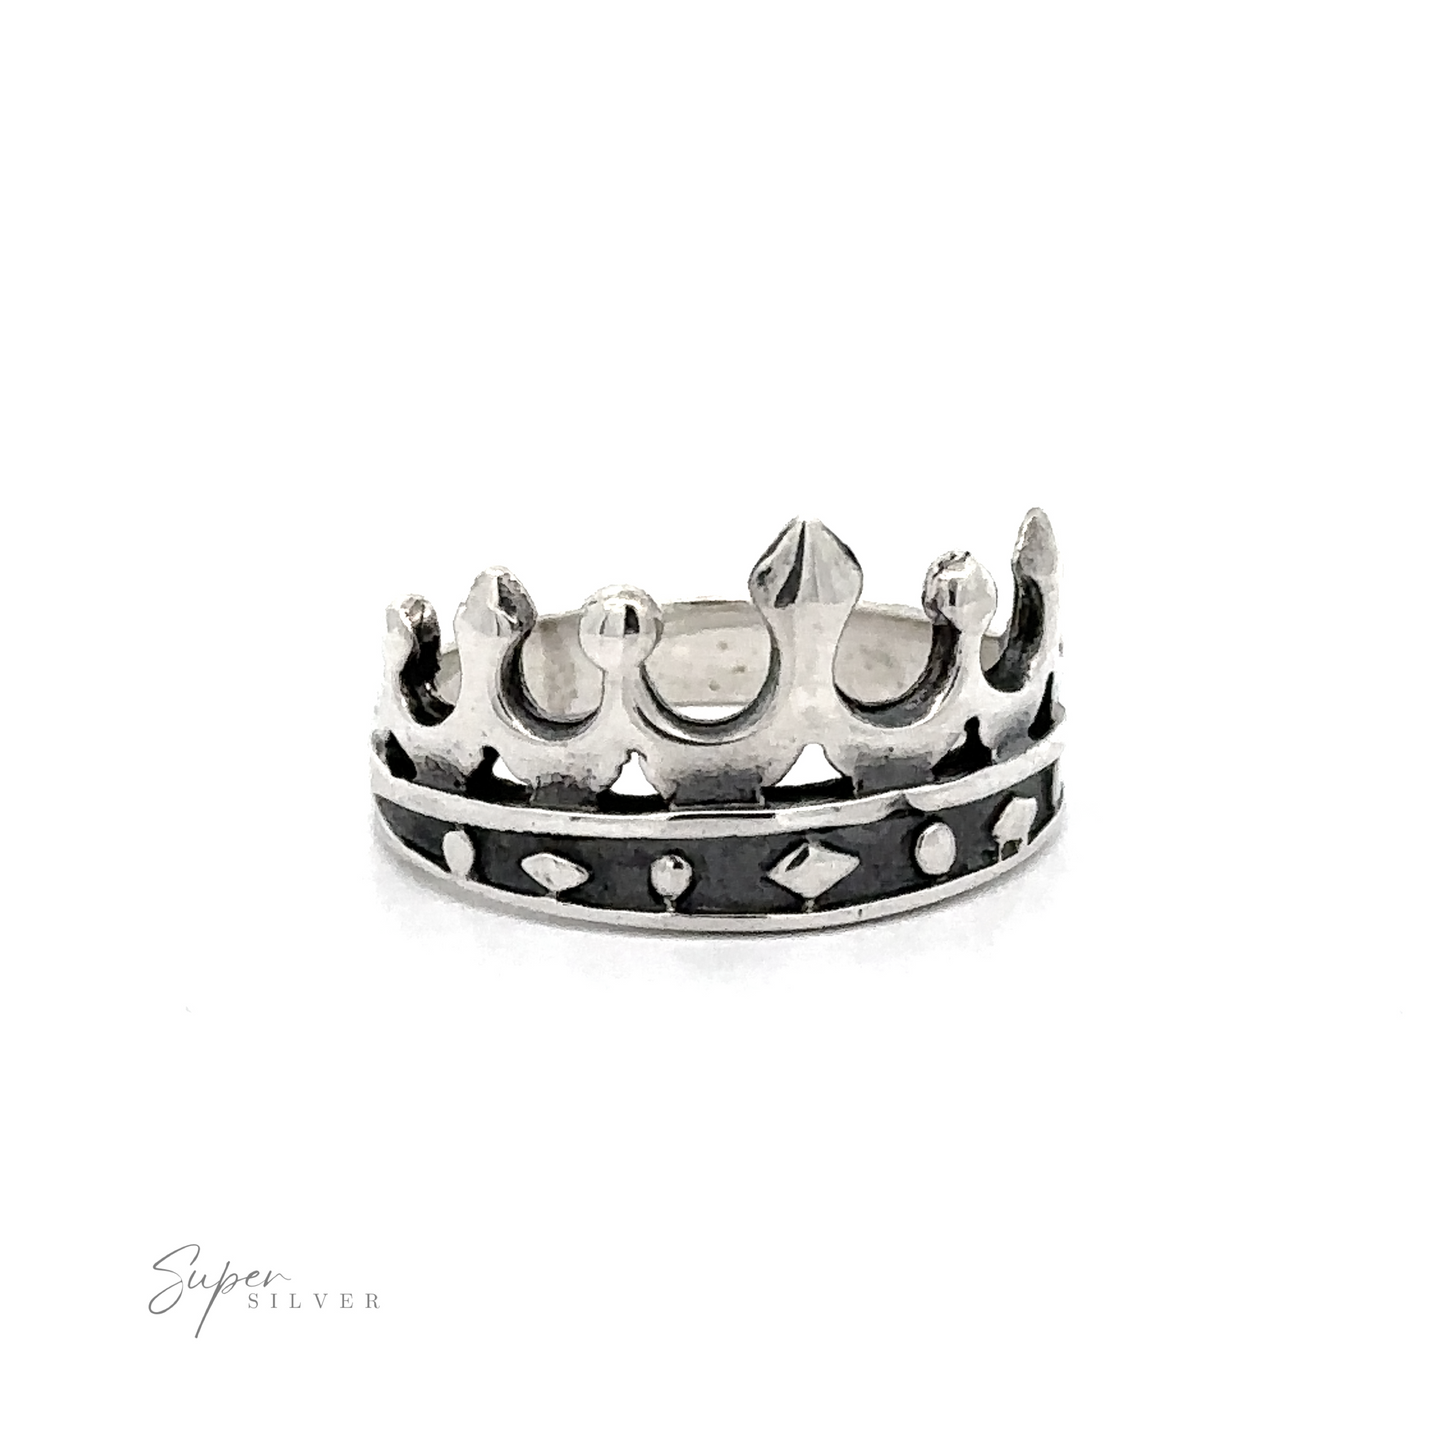 A stylish silver Crown Ring on a white background.